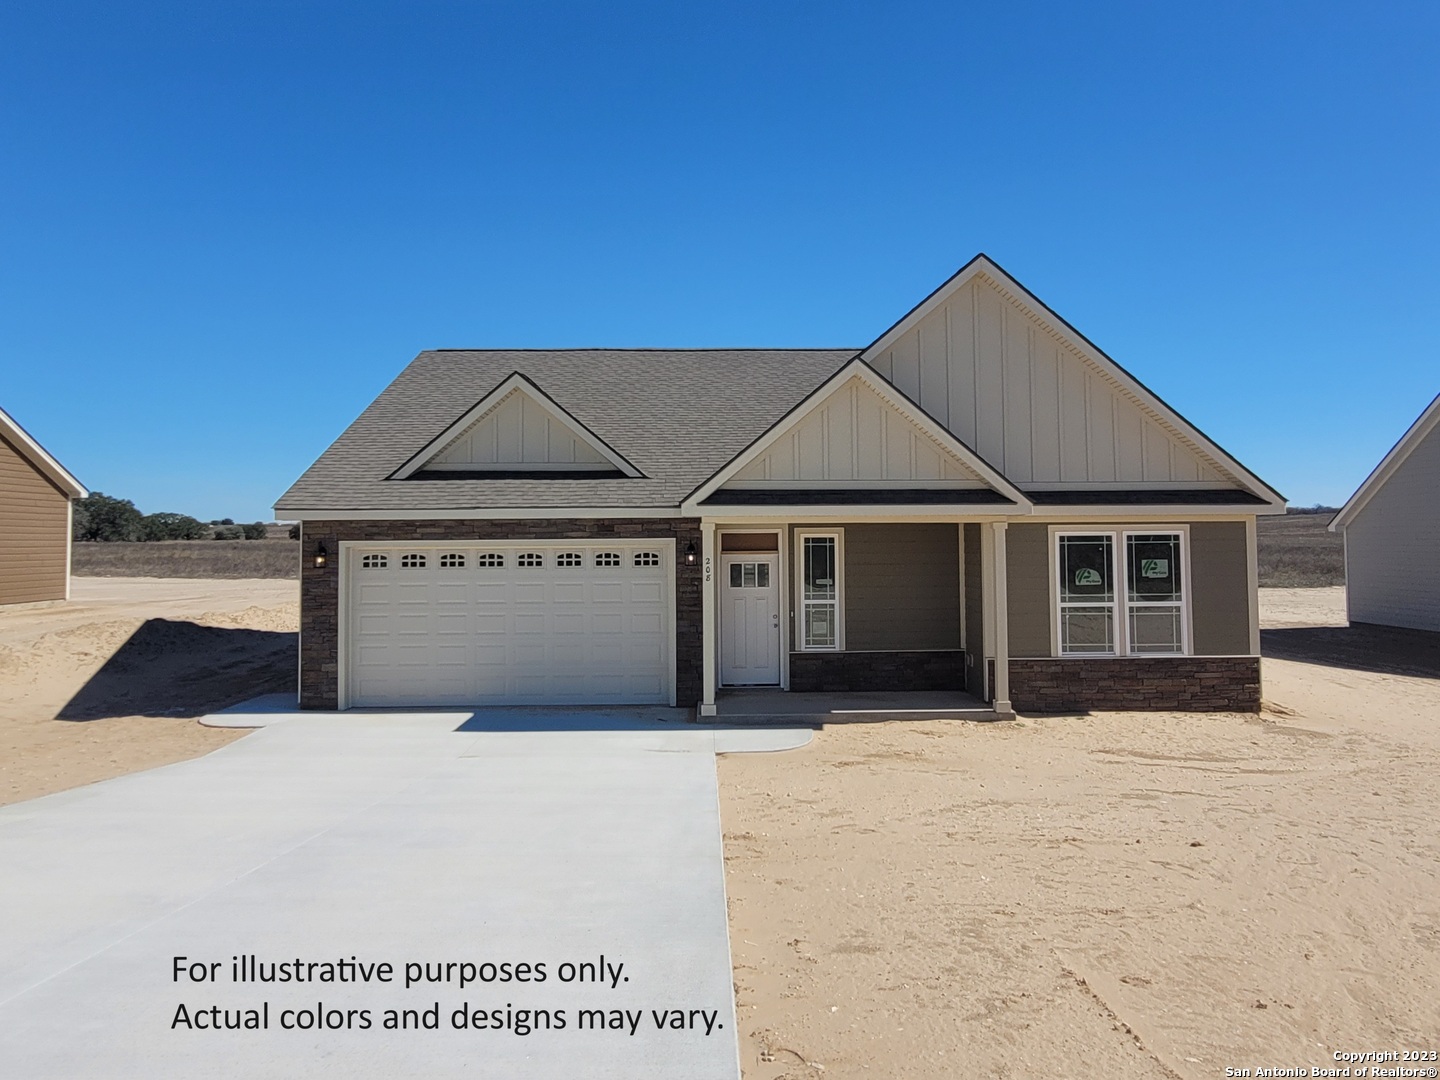 Photo of 160 Turnberry Dr in La Vernia, TX